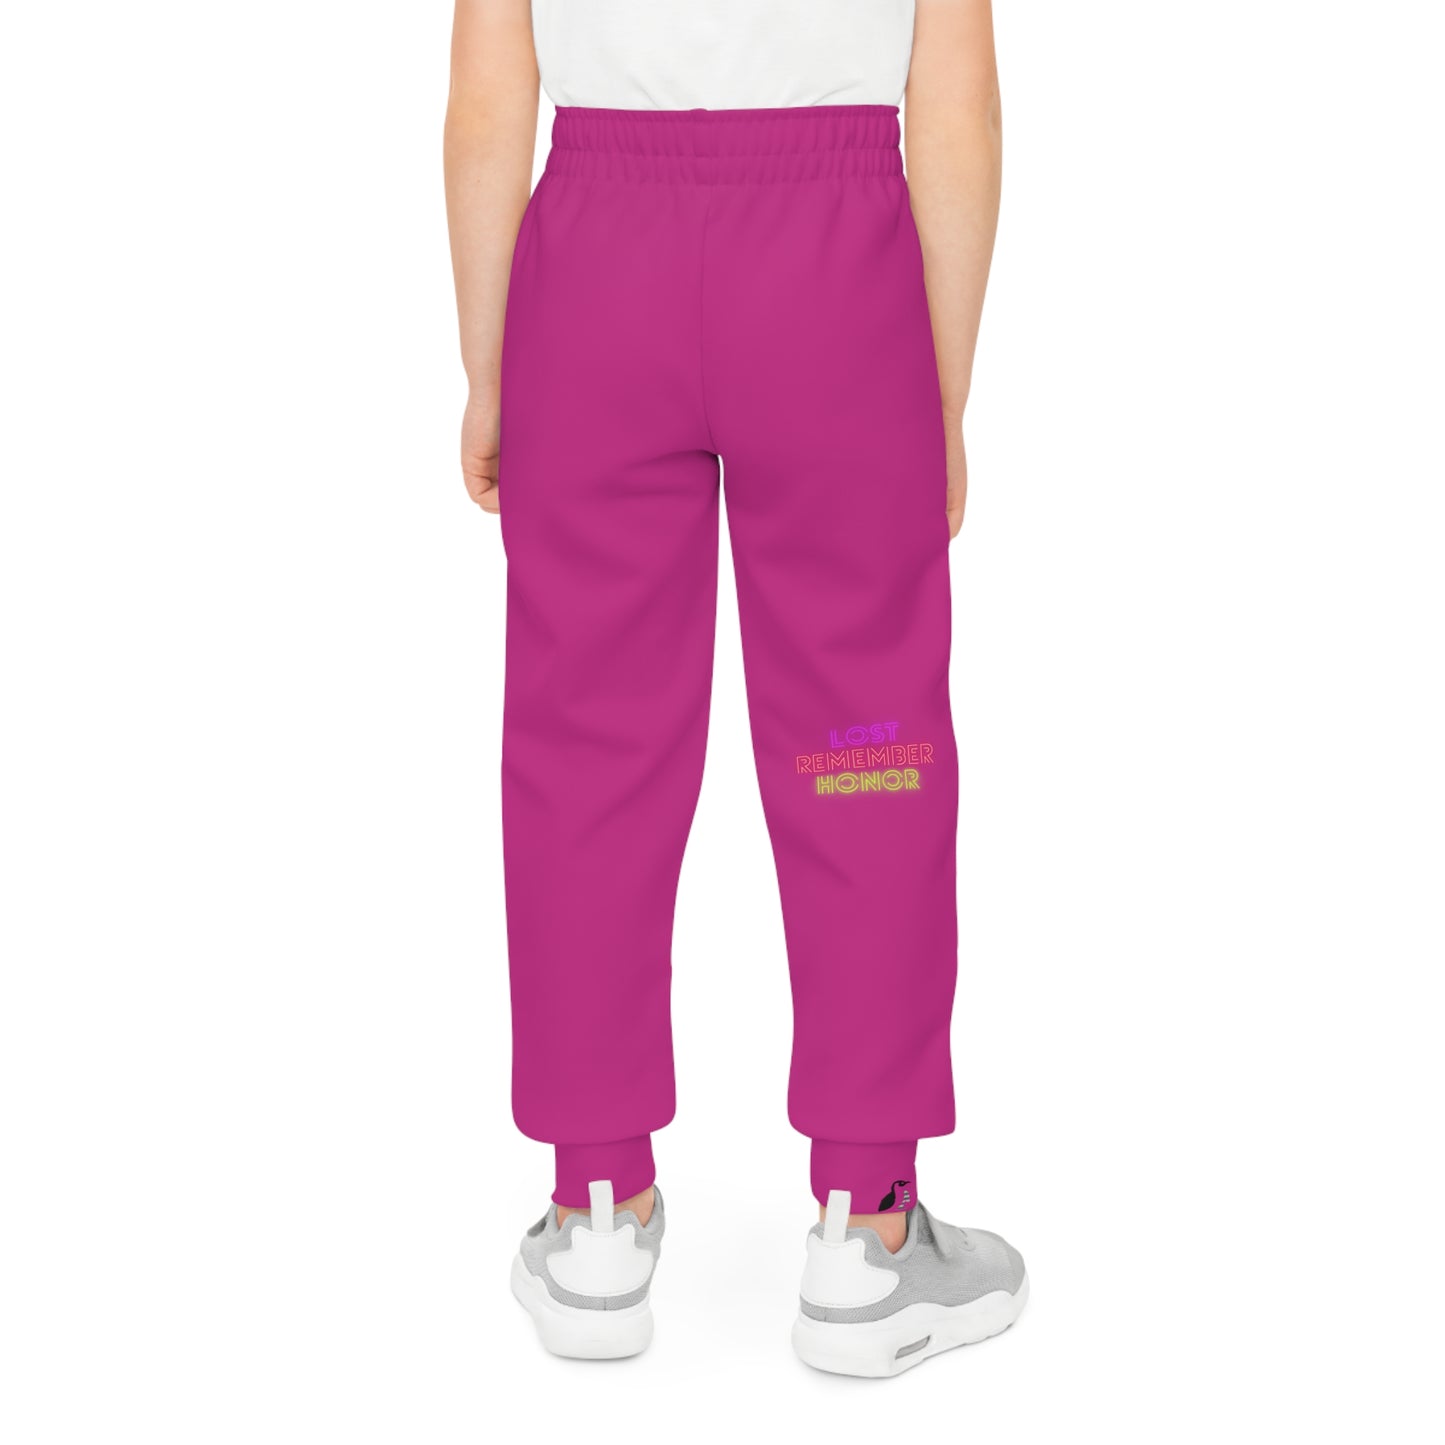 Youth Joggers: Racing Pink